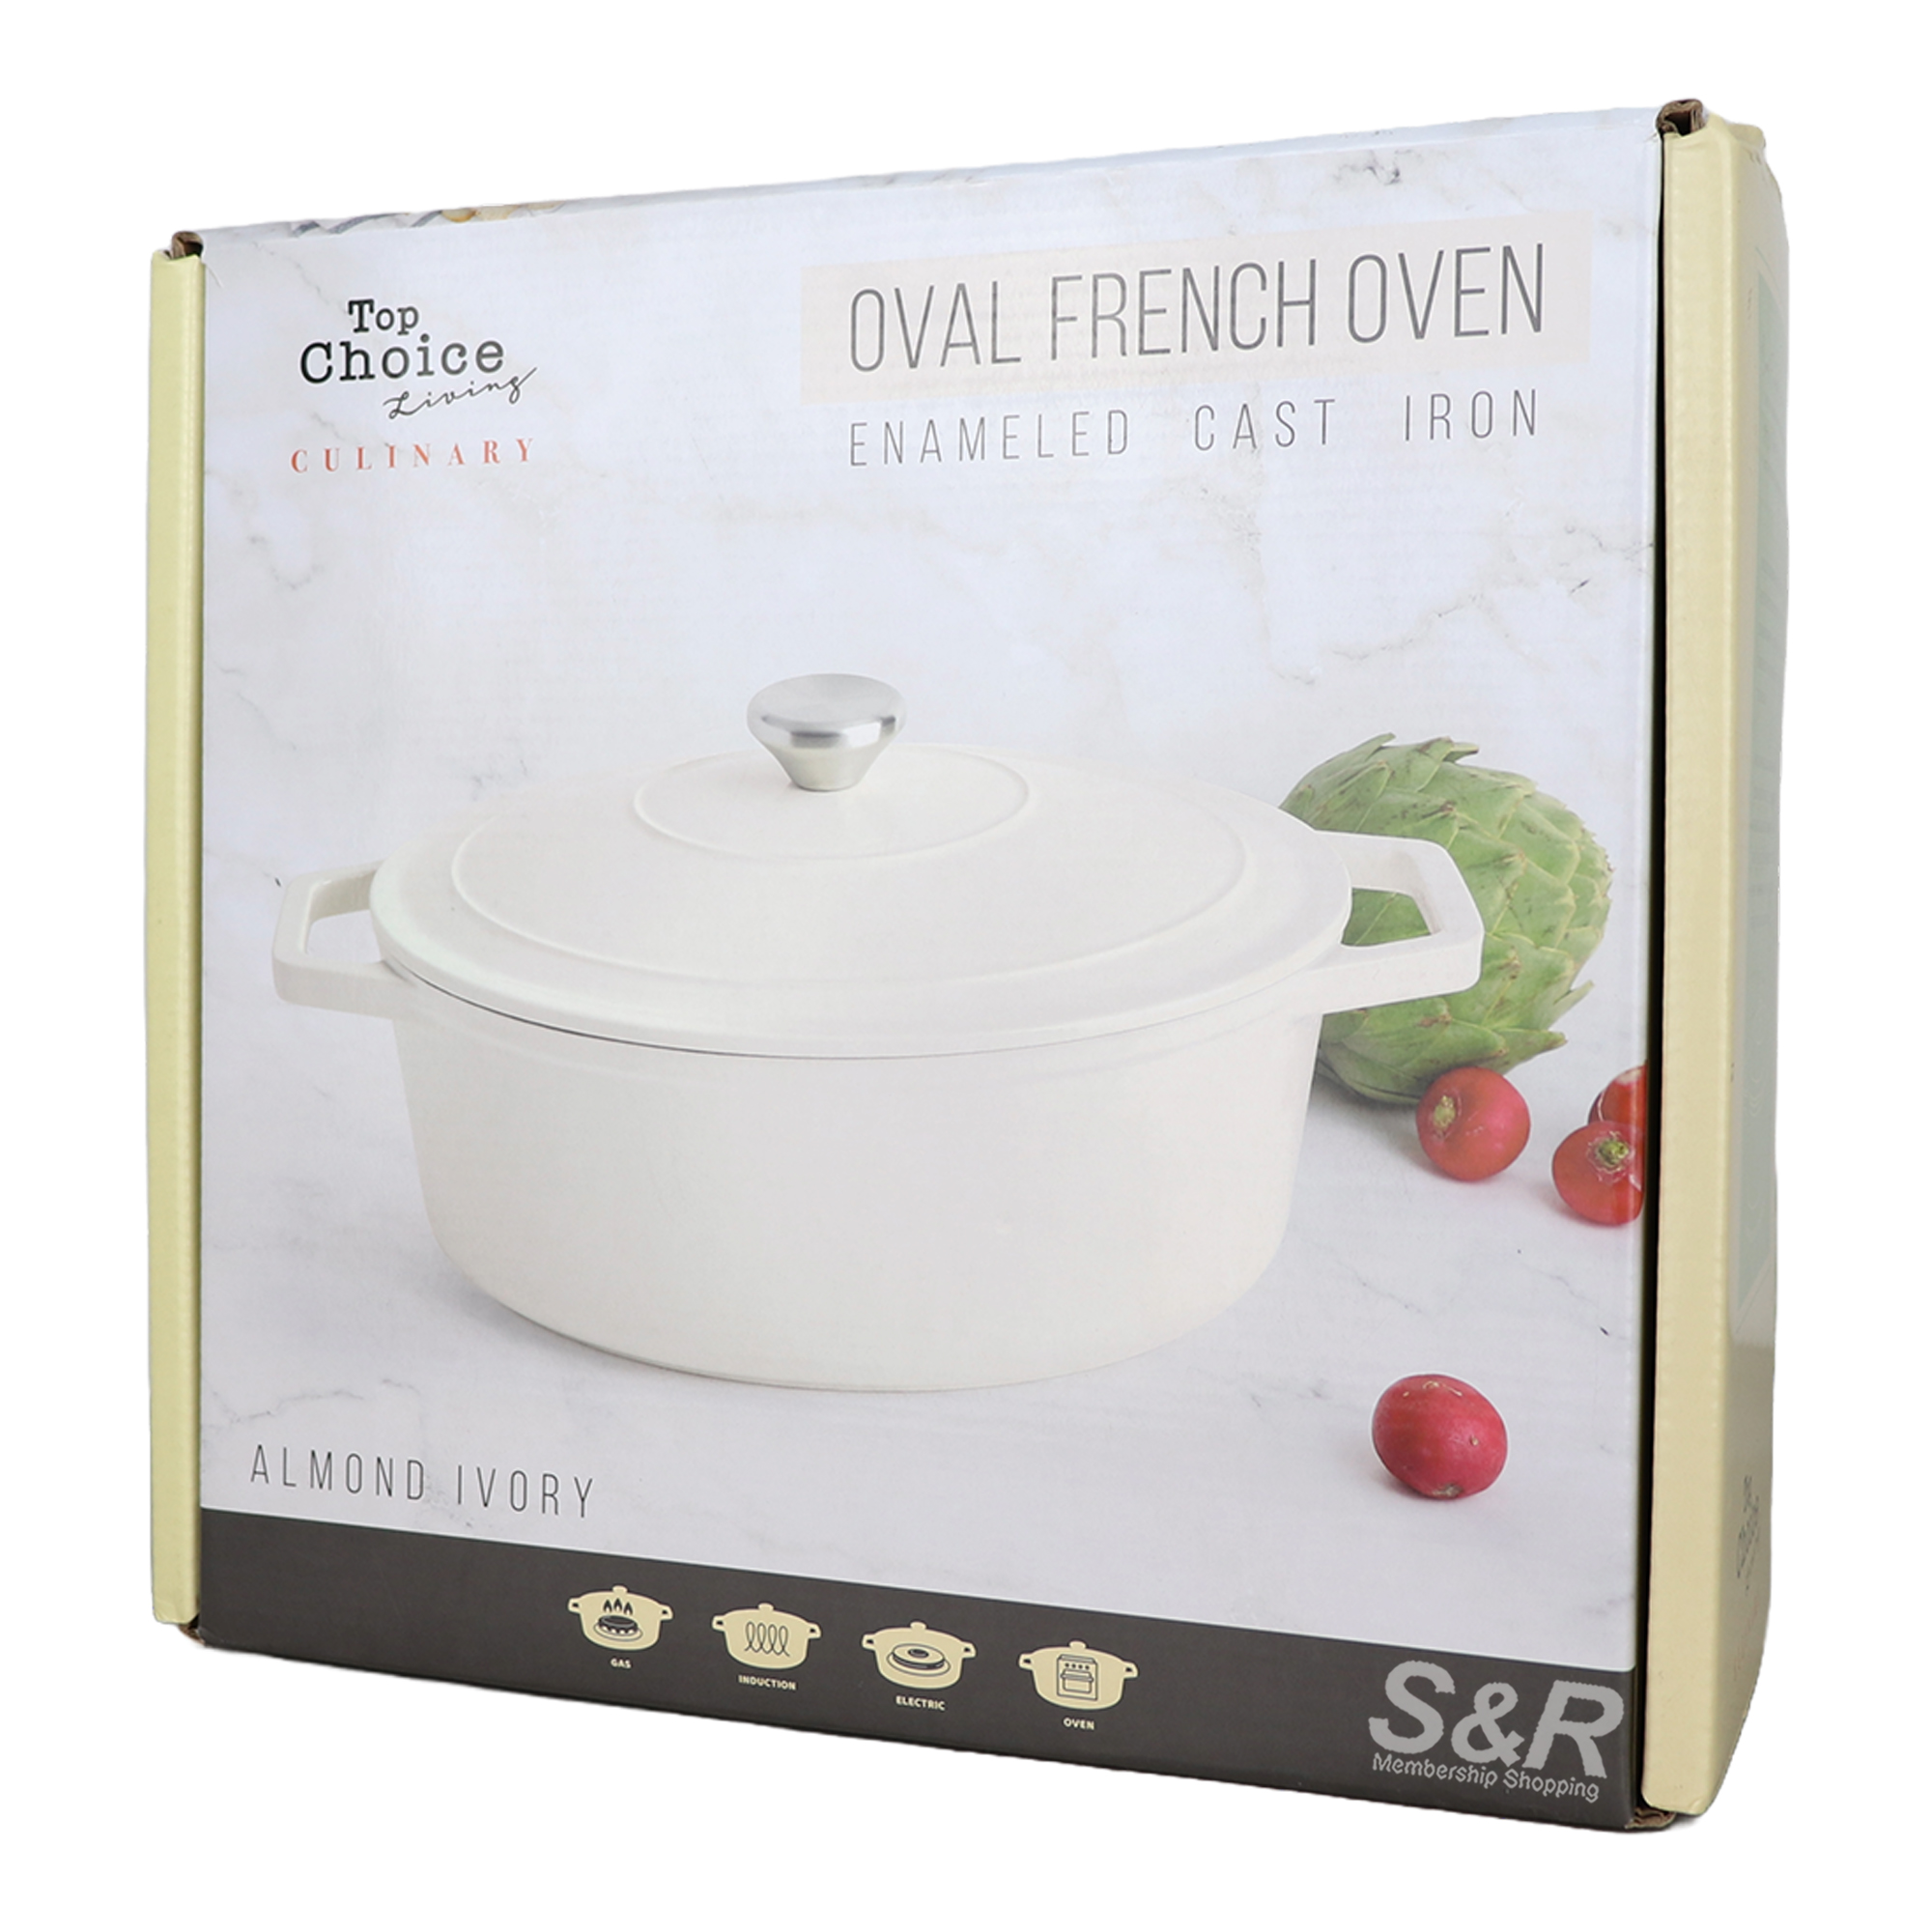 Top Choice Ovel French Oven Enamel Cast Iron